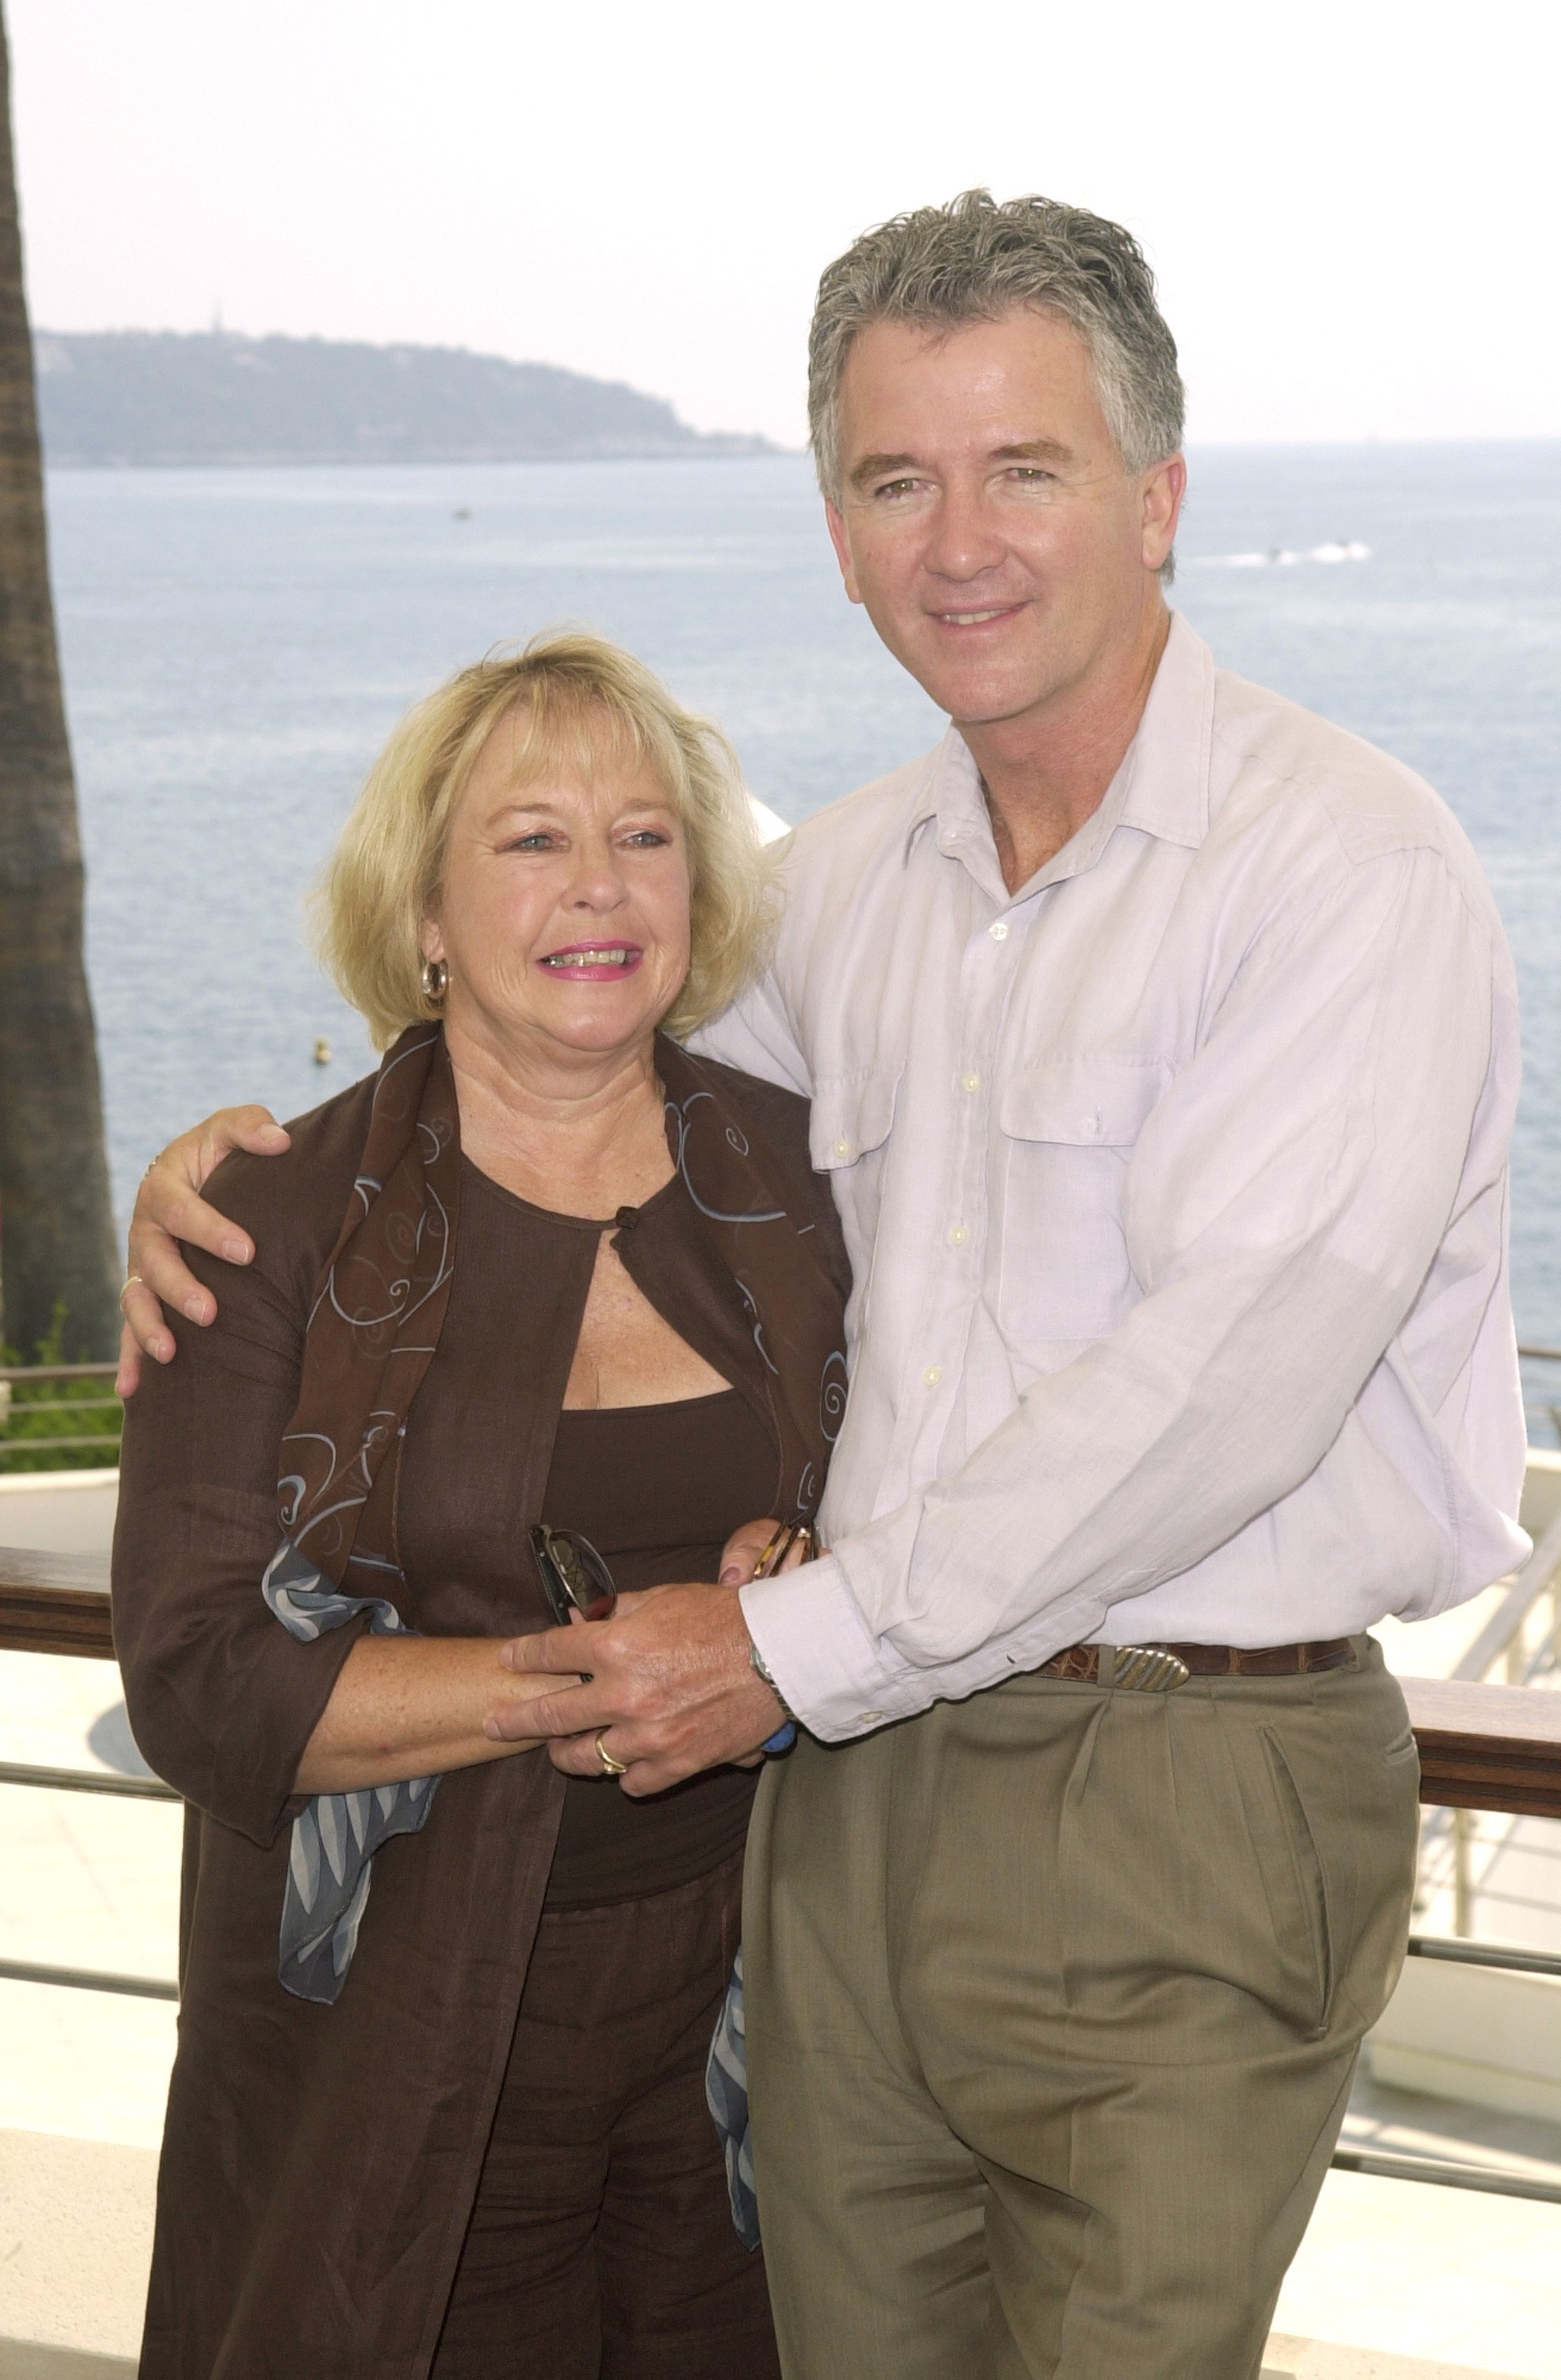 Patrick Duffy and wife Carlyn during Monte Carlo Television Festival 2002 in Monte Carlo, Monaco. | Source: Getty Images